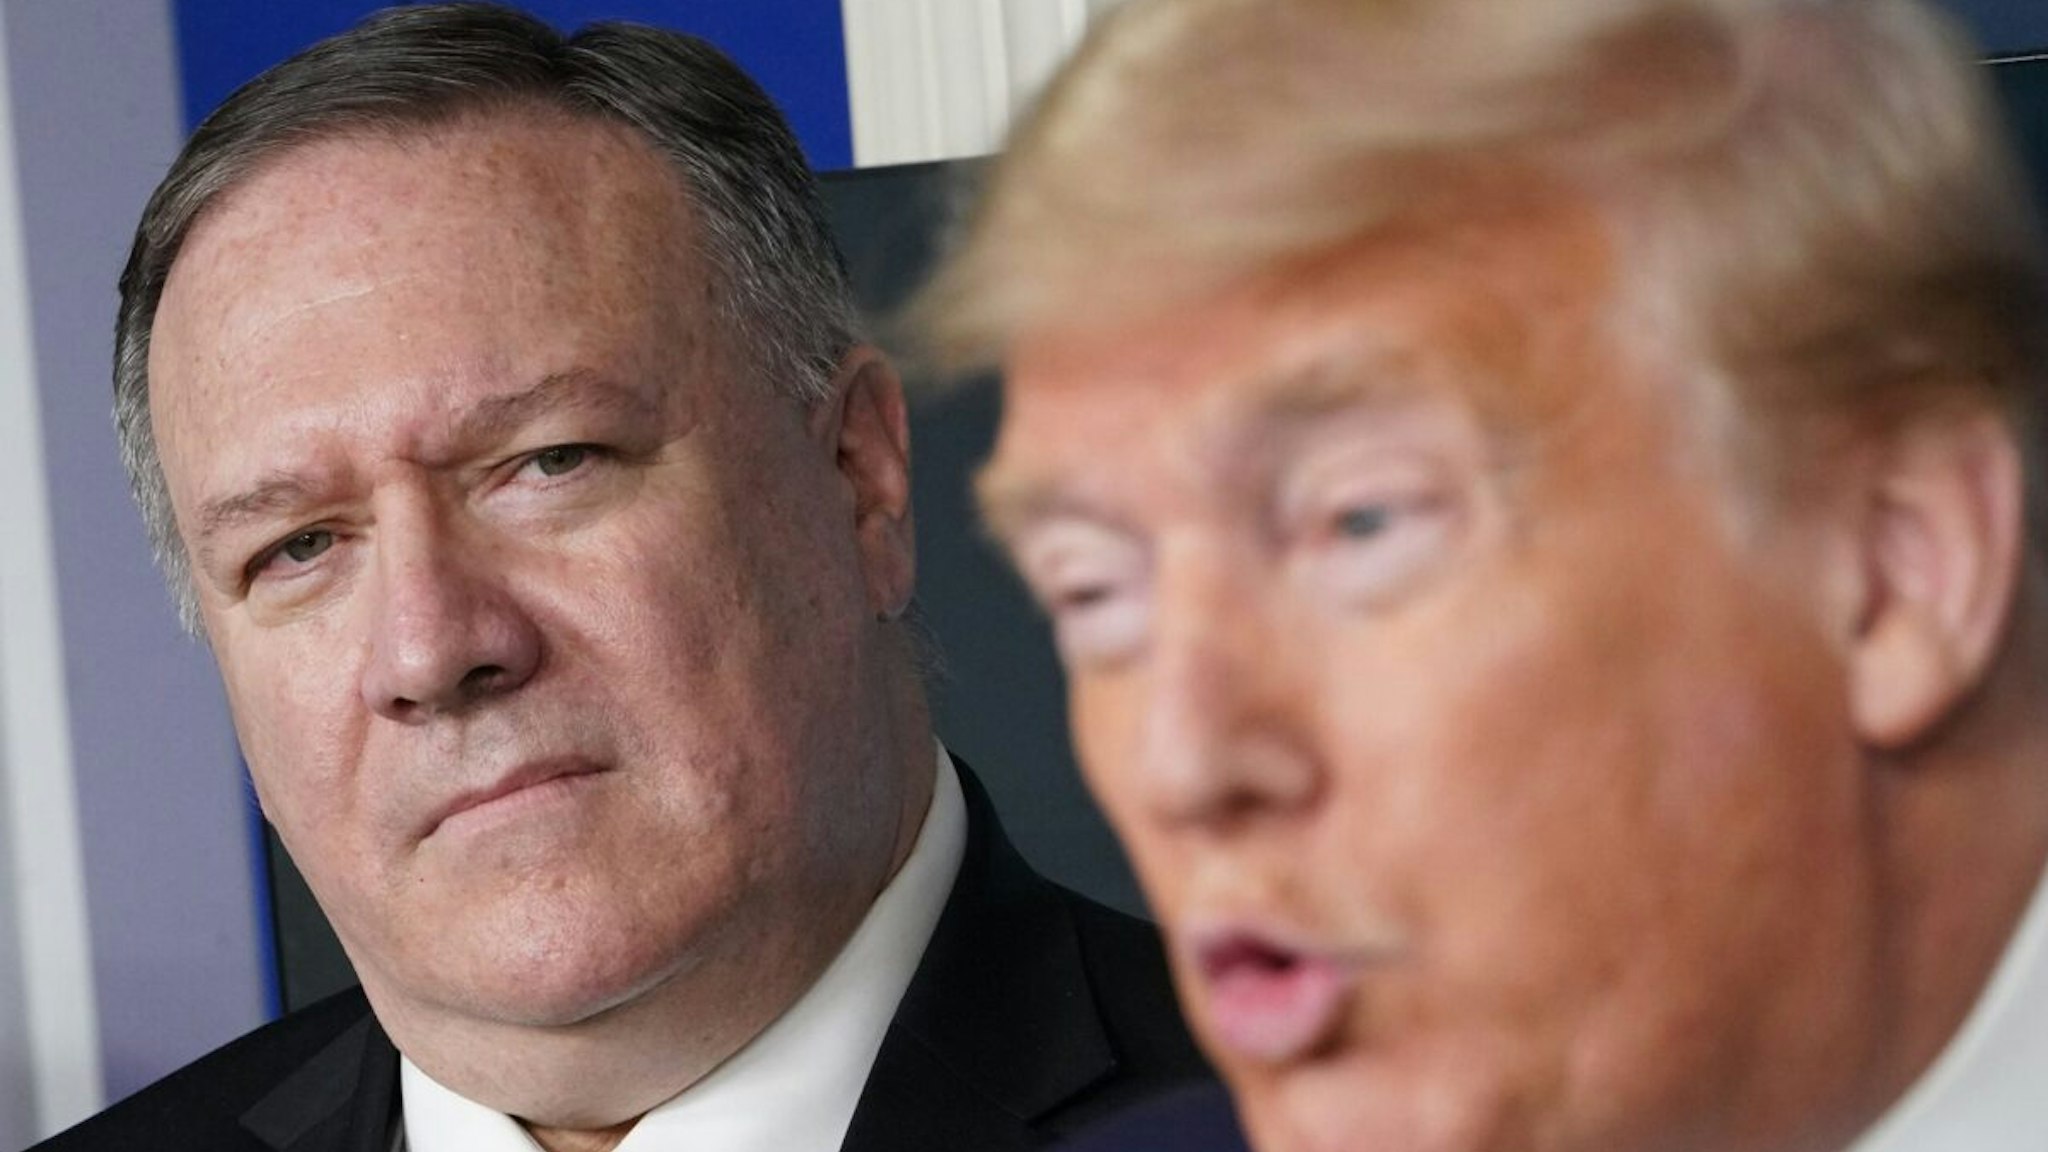 US Secretary of States Mike Pompeo listens as US President Donald Trump speaks during the daily briefing on the novel coronavirus, COVID-19, in the Brady Briefing Room at the White House on April 8, 2020, in Washington, DC.